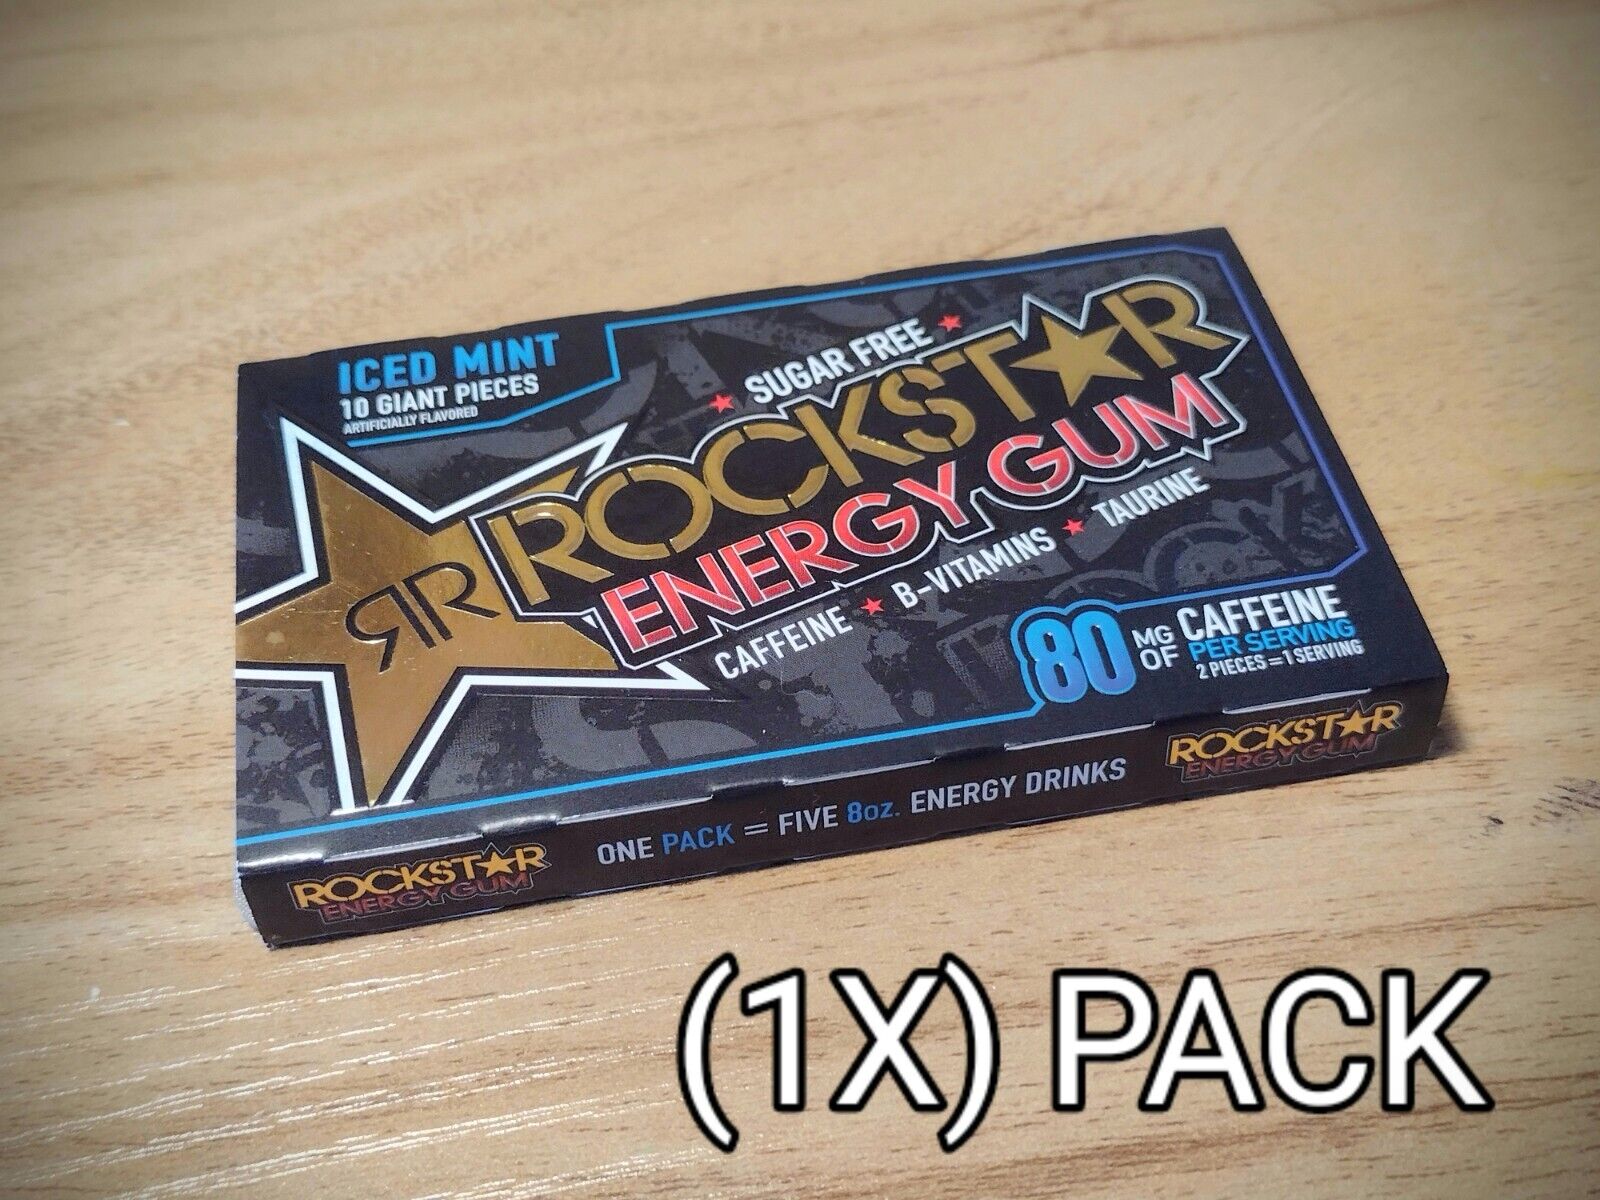 RARE ROCKSTAR ENERGY DRINK GUM ICED MINT - (1X) UNOPENED SEALED Pack